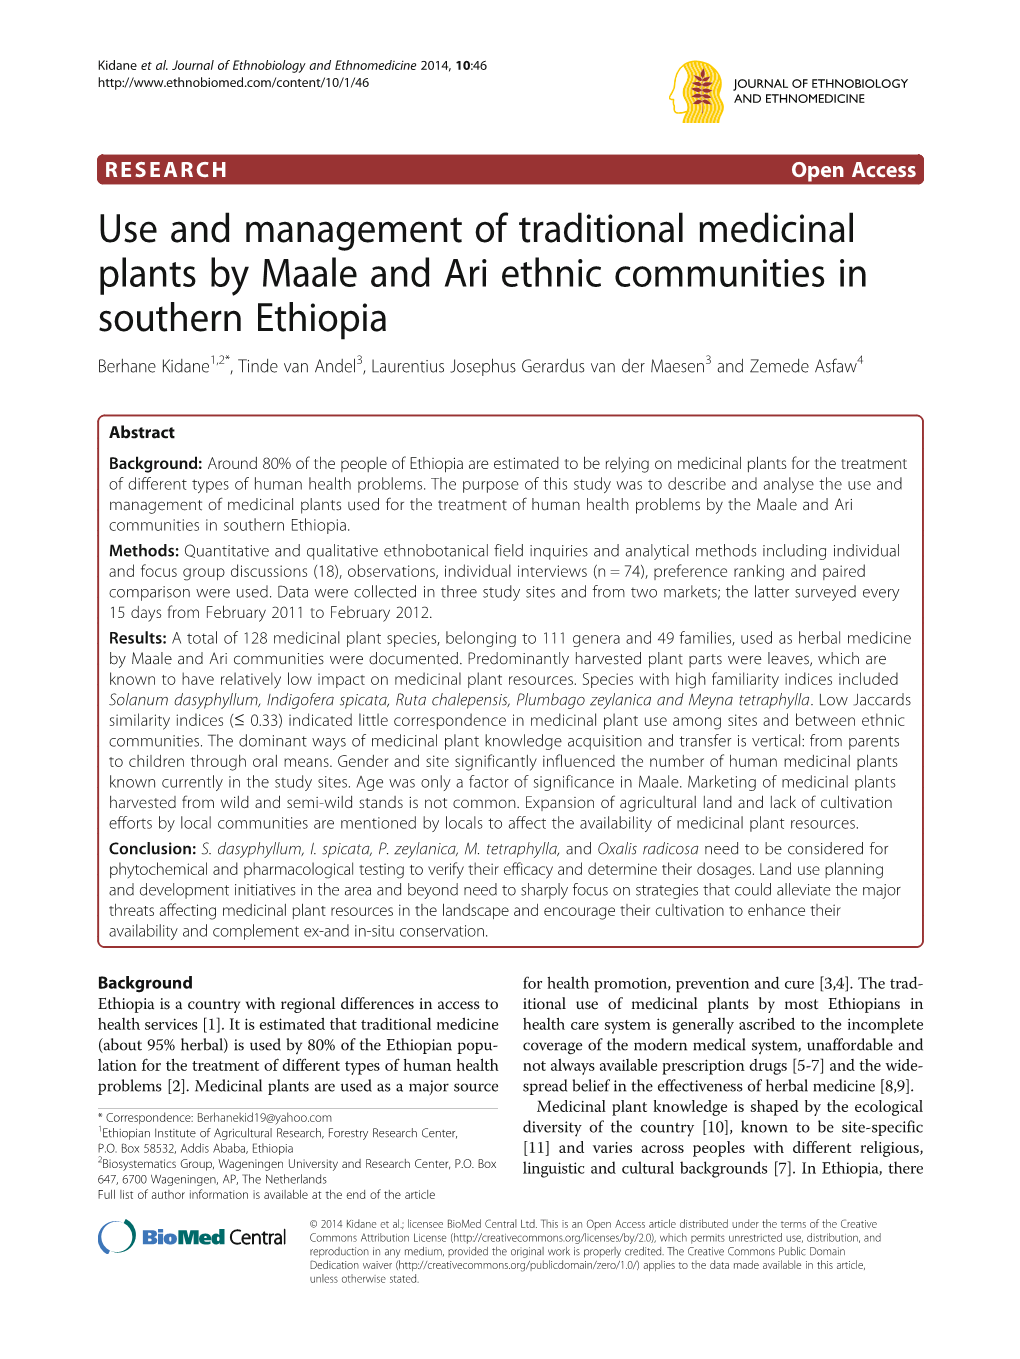 Use and Management of Traditional Medicinal Plants By